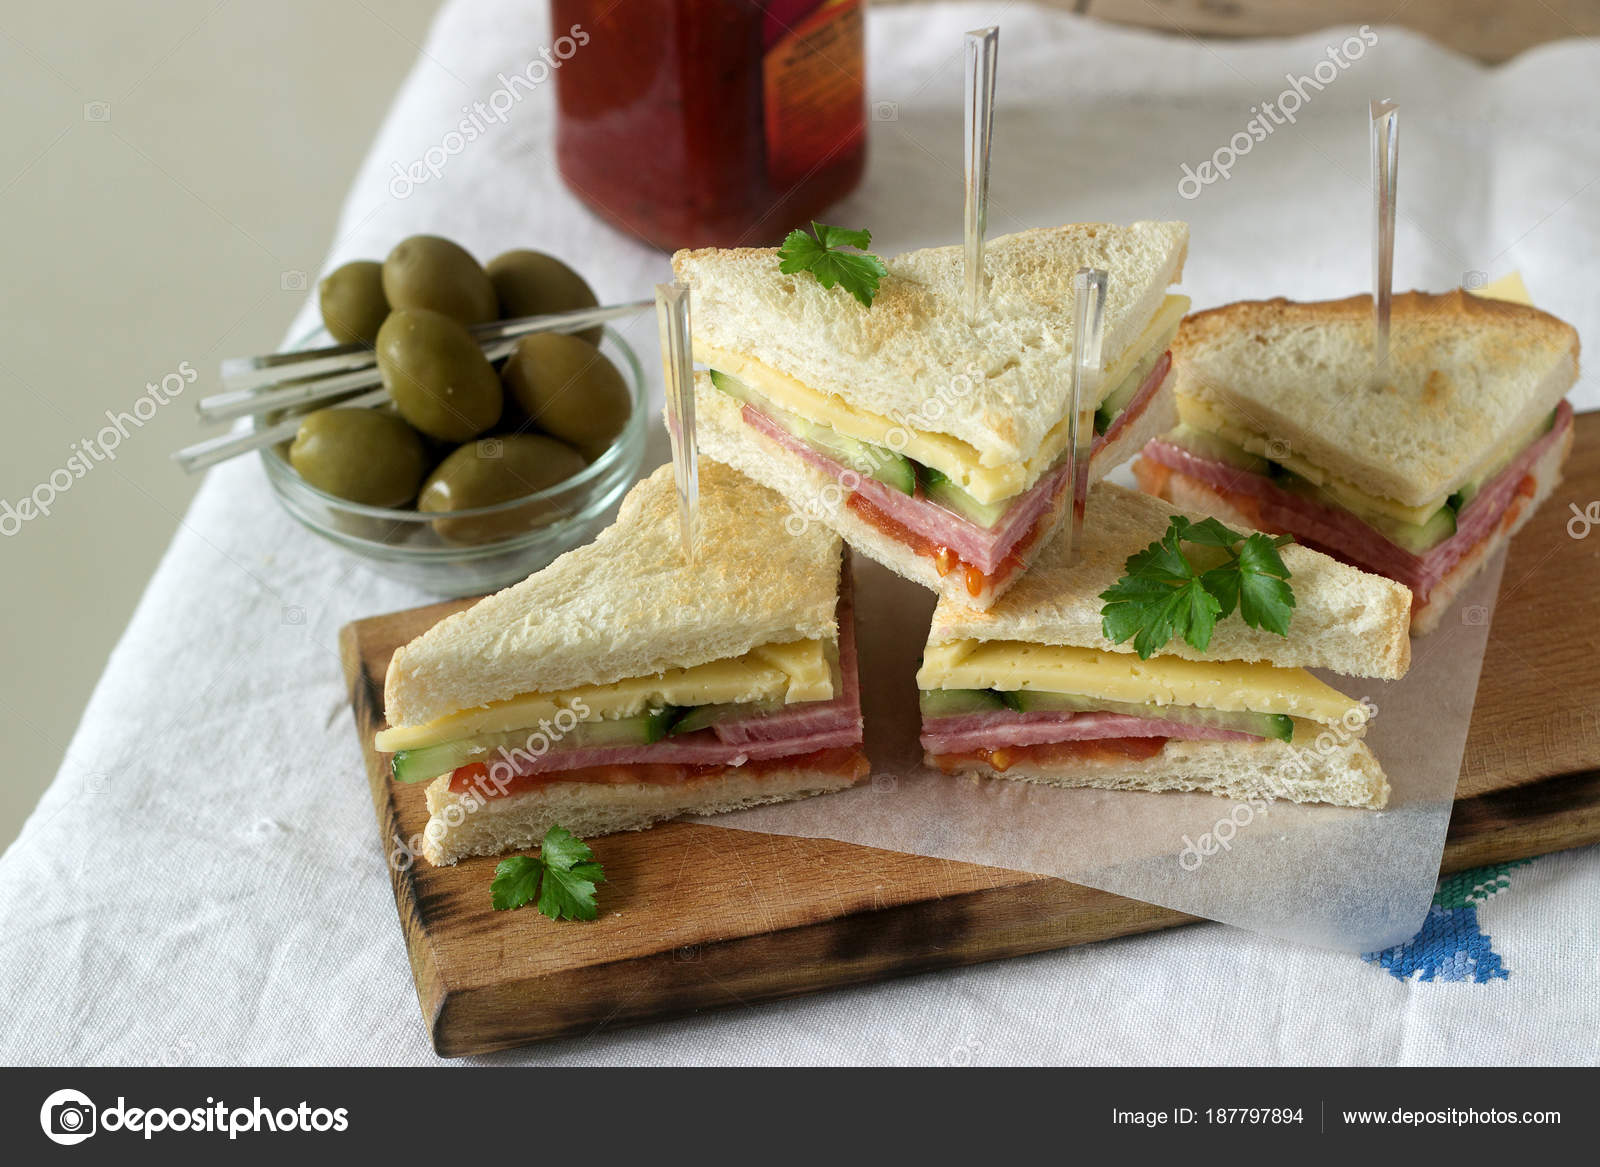 https://st3.depositphotos.com/13348876/18779/i/1600/depositphotos_187797894-stock-photo-sandwiches-with-sausage-meat-cheese.jpg